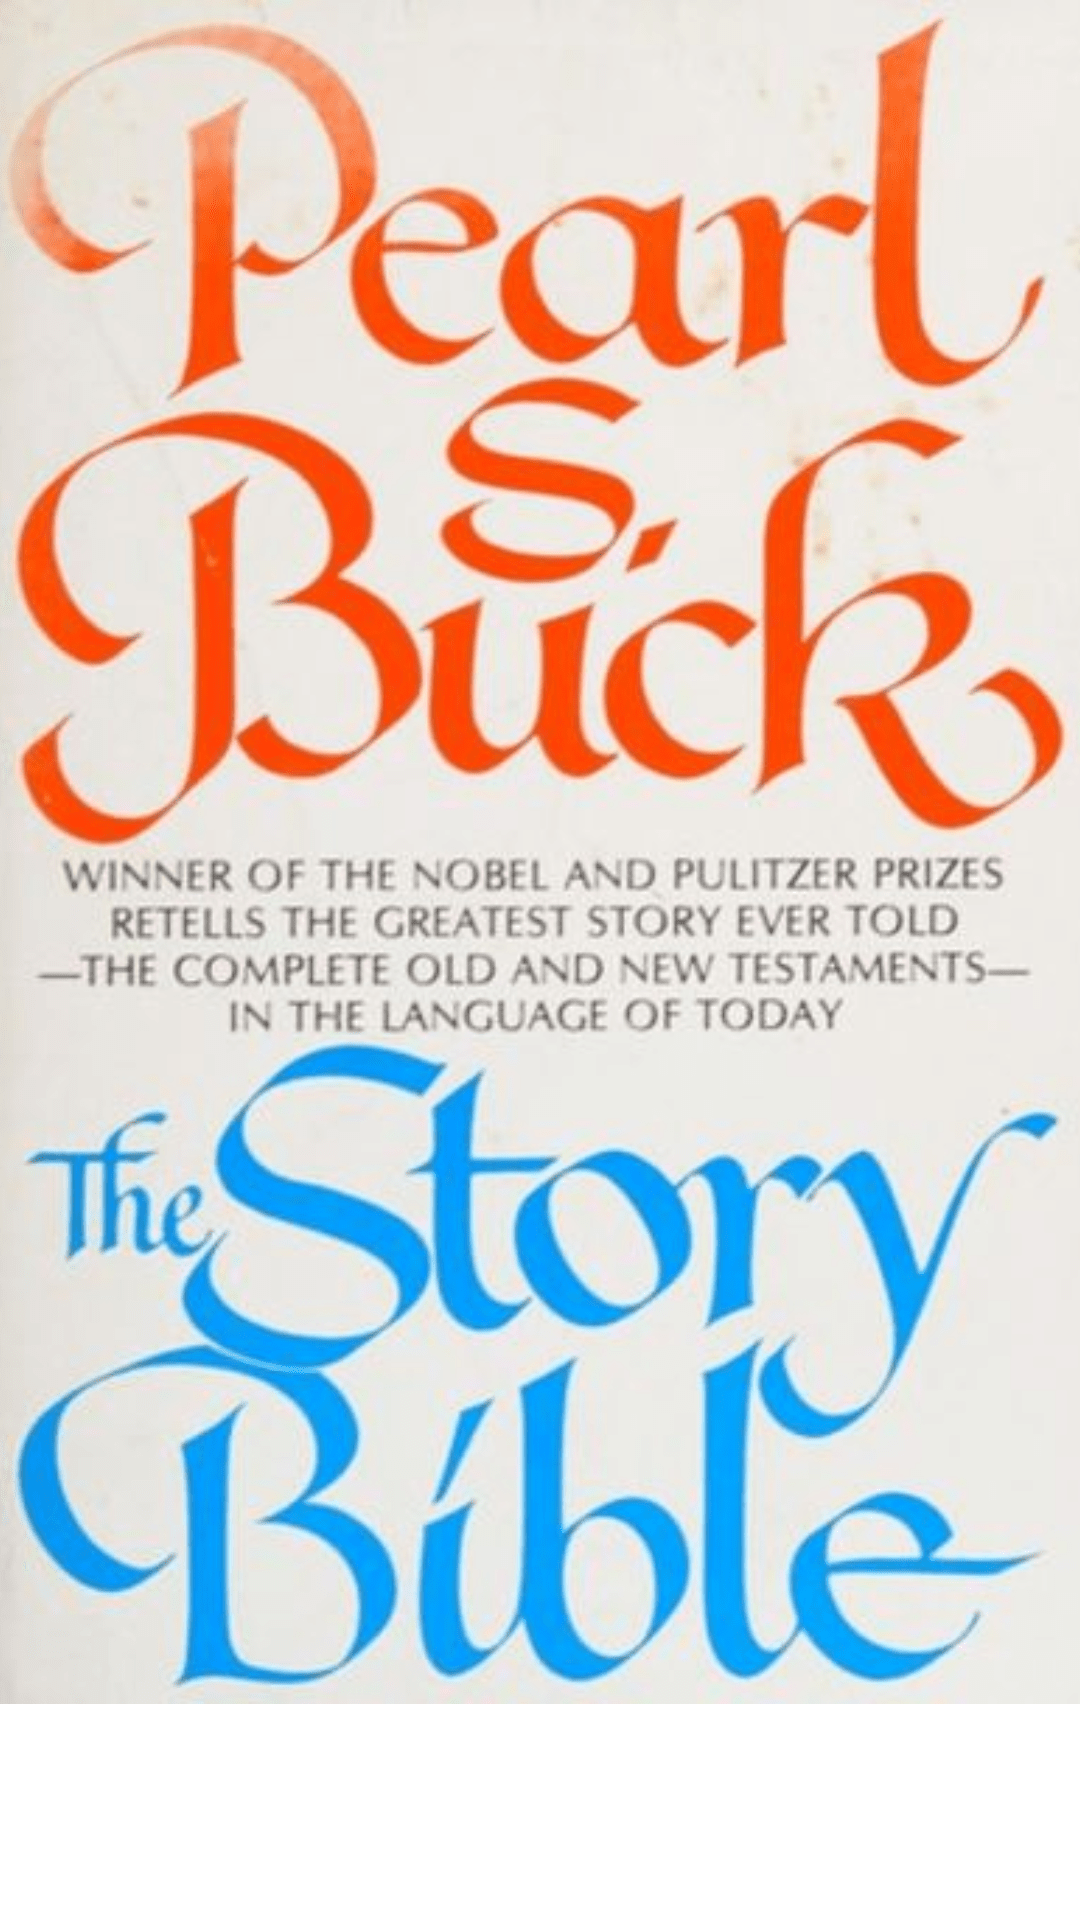 The Story Bible by Pearl S. Buck